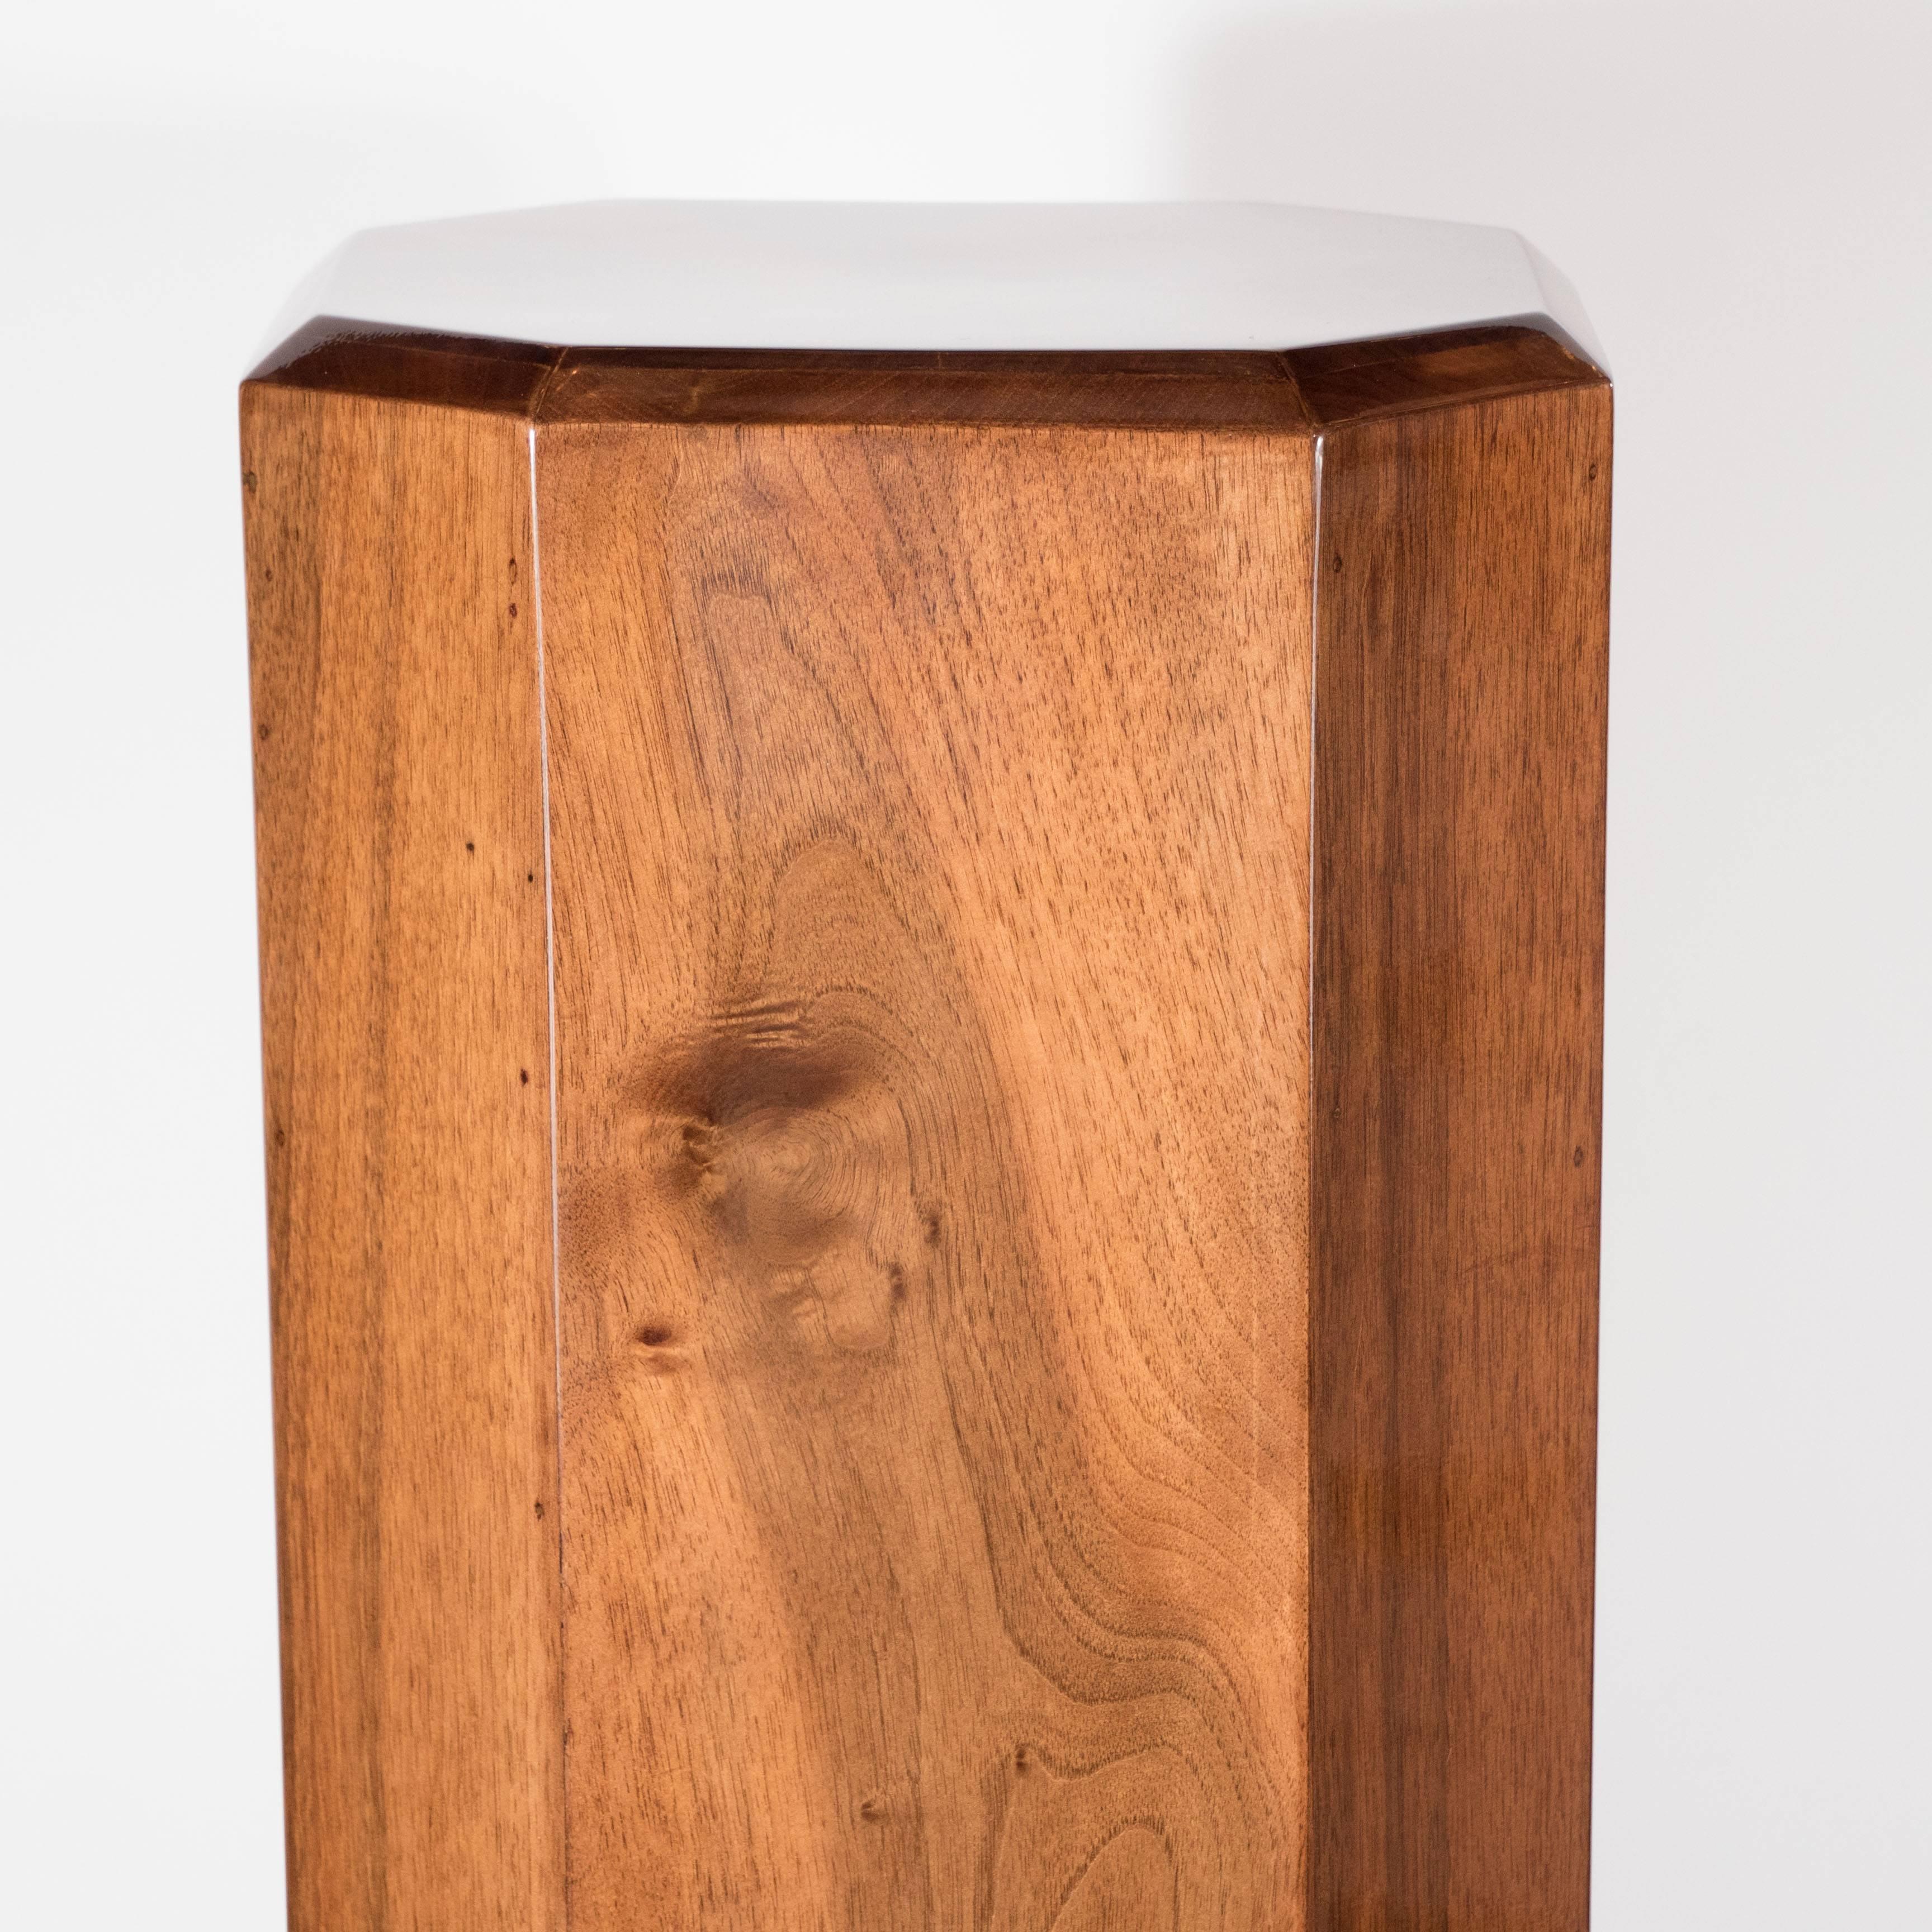 Art Deco Skyscraper-Style Pedestal in Bookmatched Walnut with Lacquer Accents 1